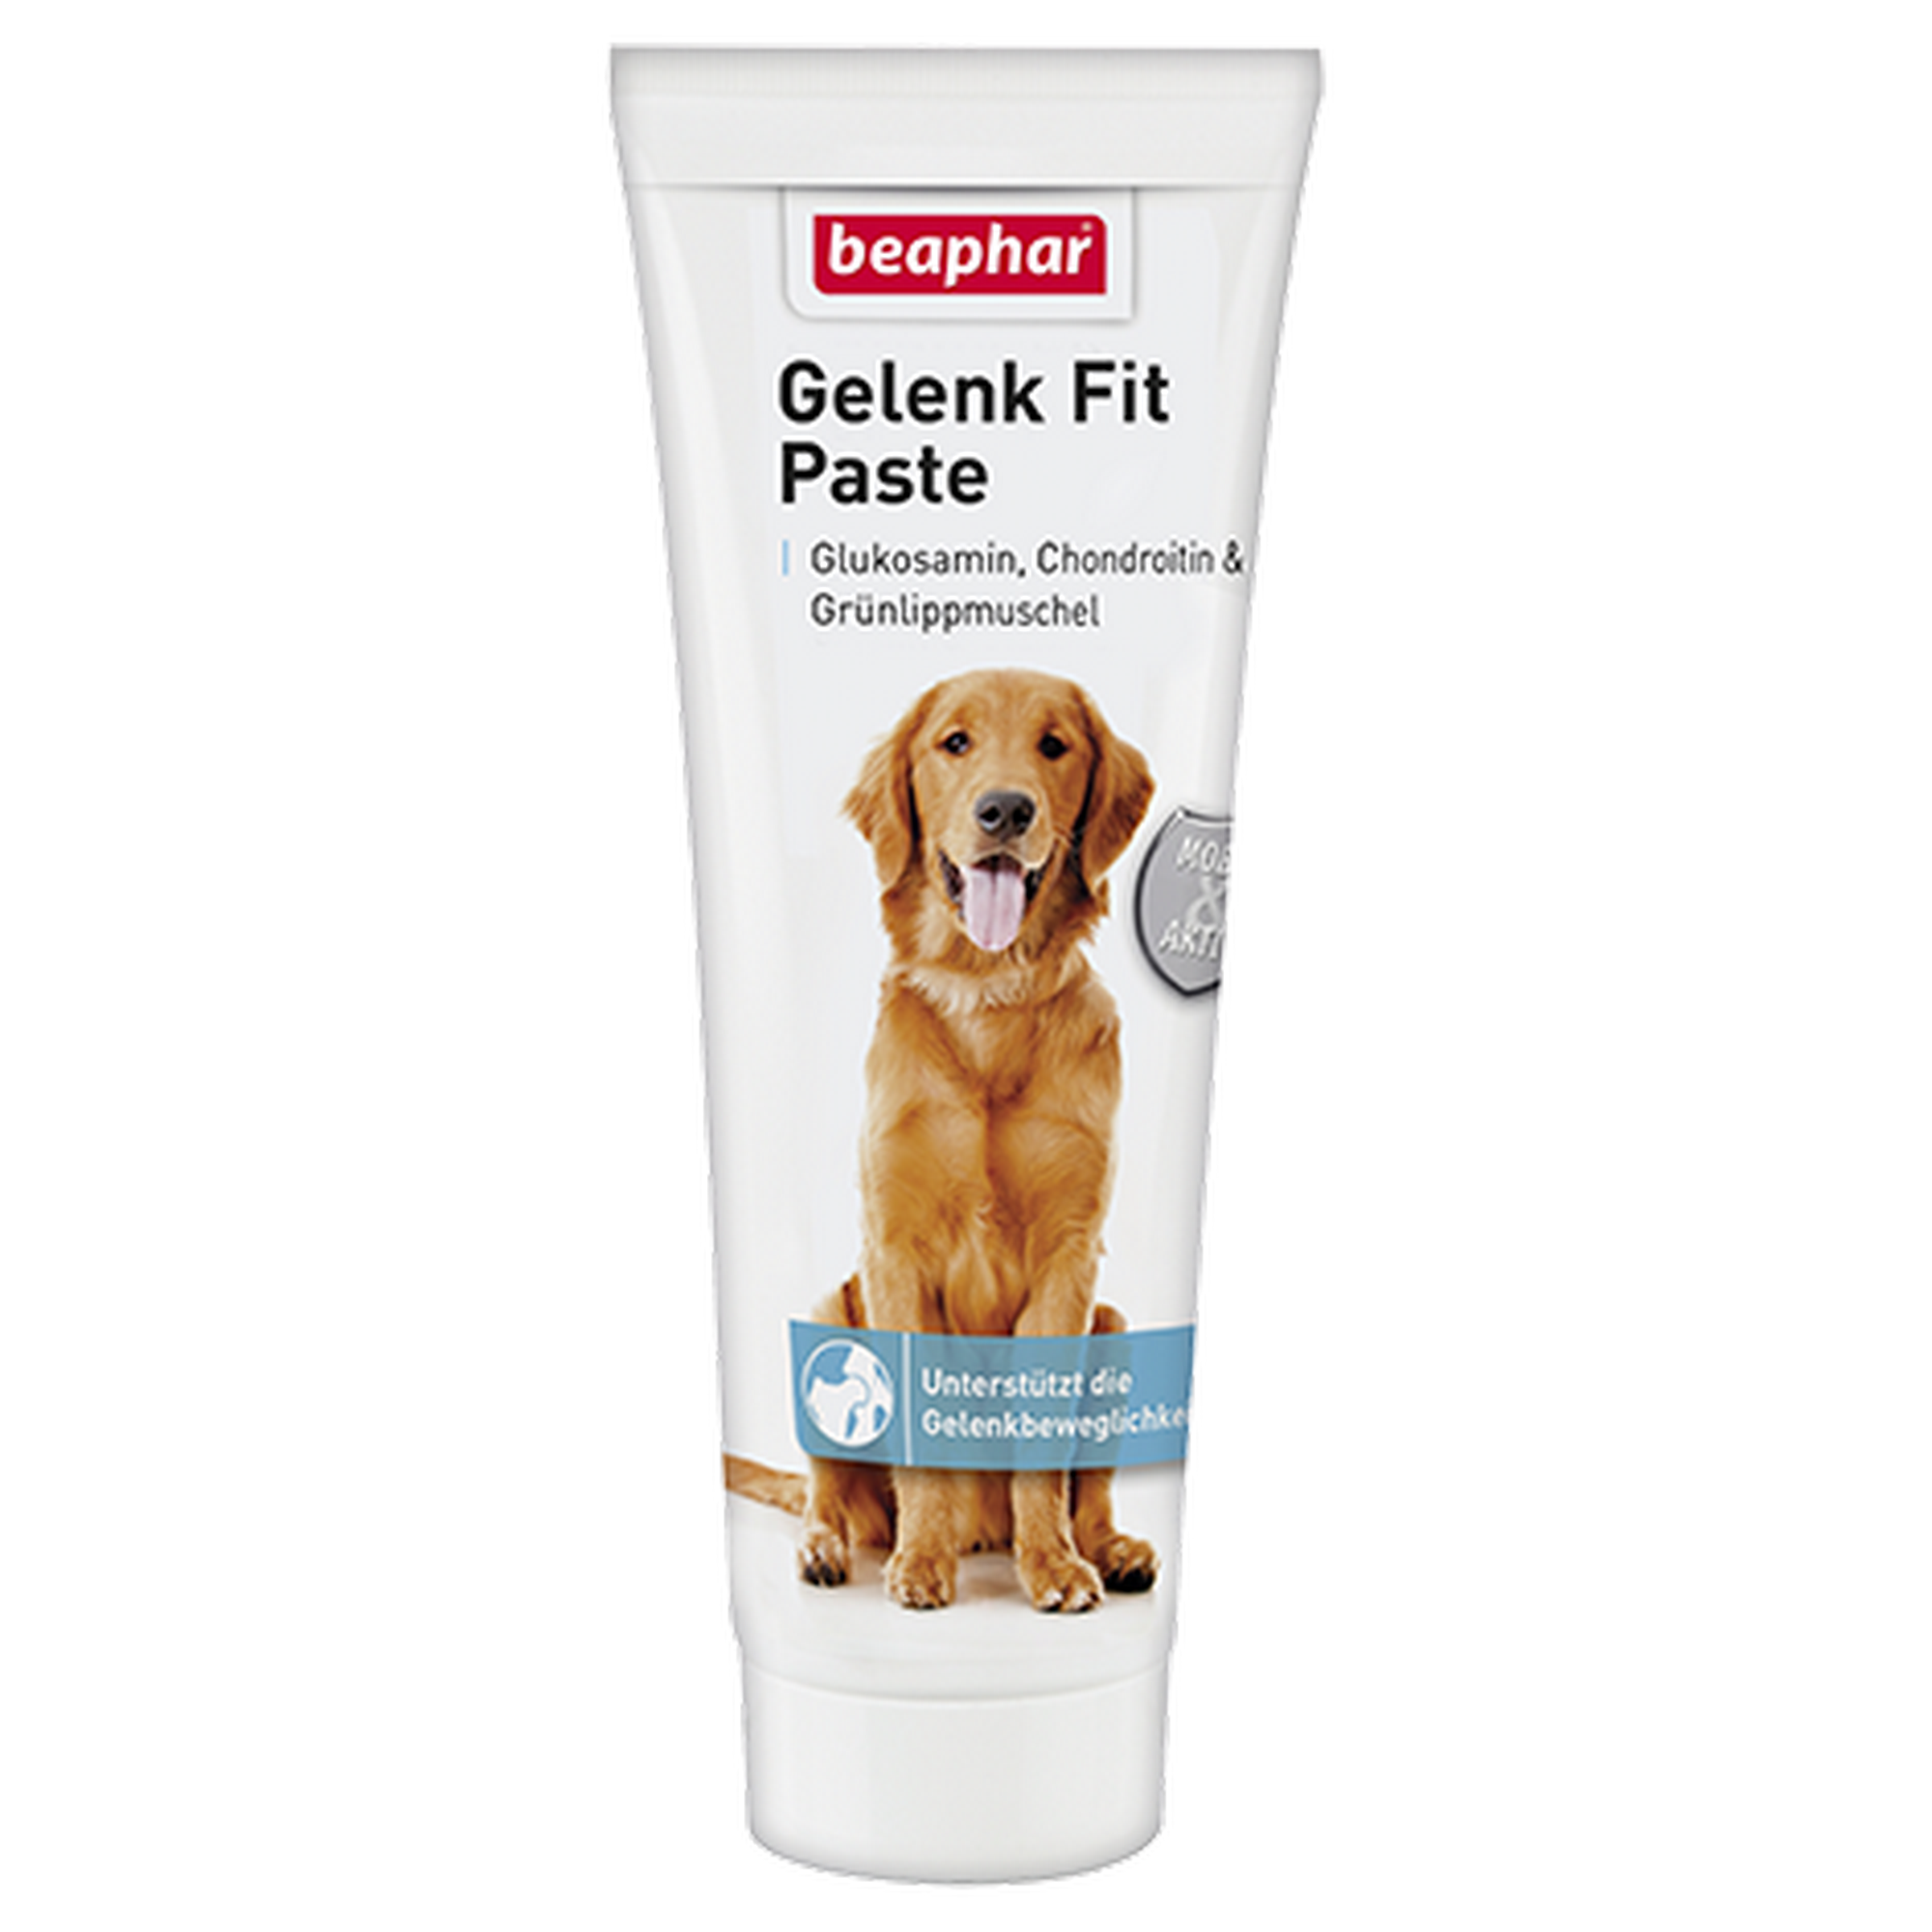 Gelenk Fit Paste 250 g + product picture